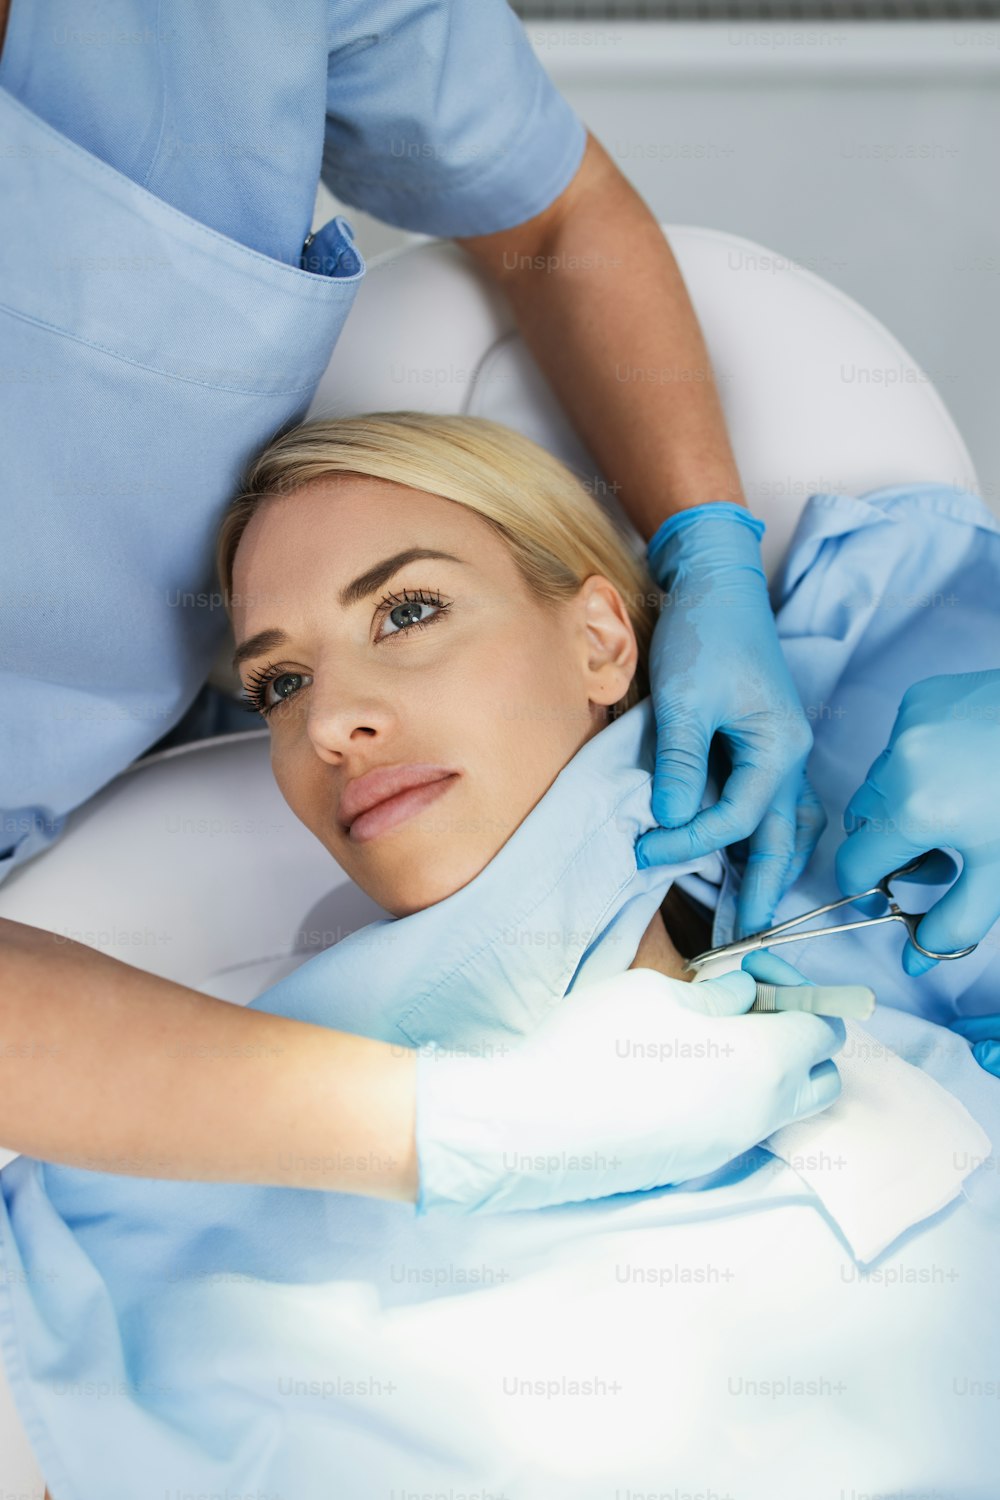 Beautiful young blonde woman receiving mole or birthmark removal treatment at beauty clinic. Medical surgery for body and face corrections concept. View from above.